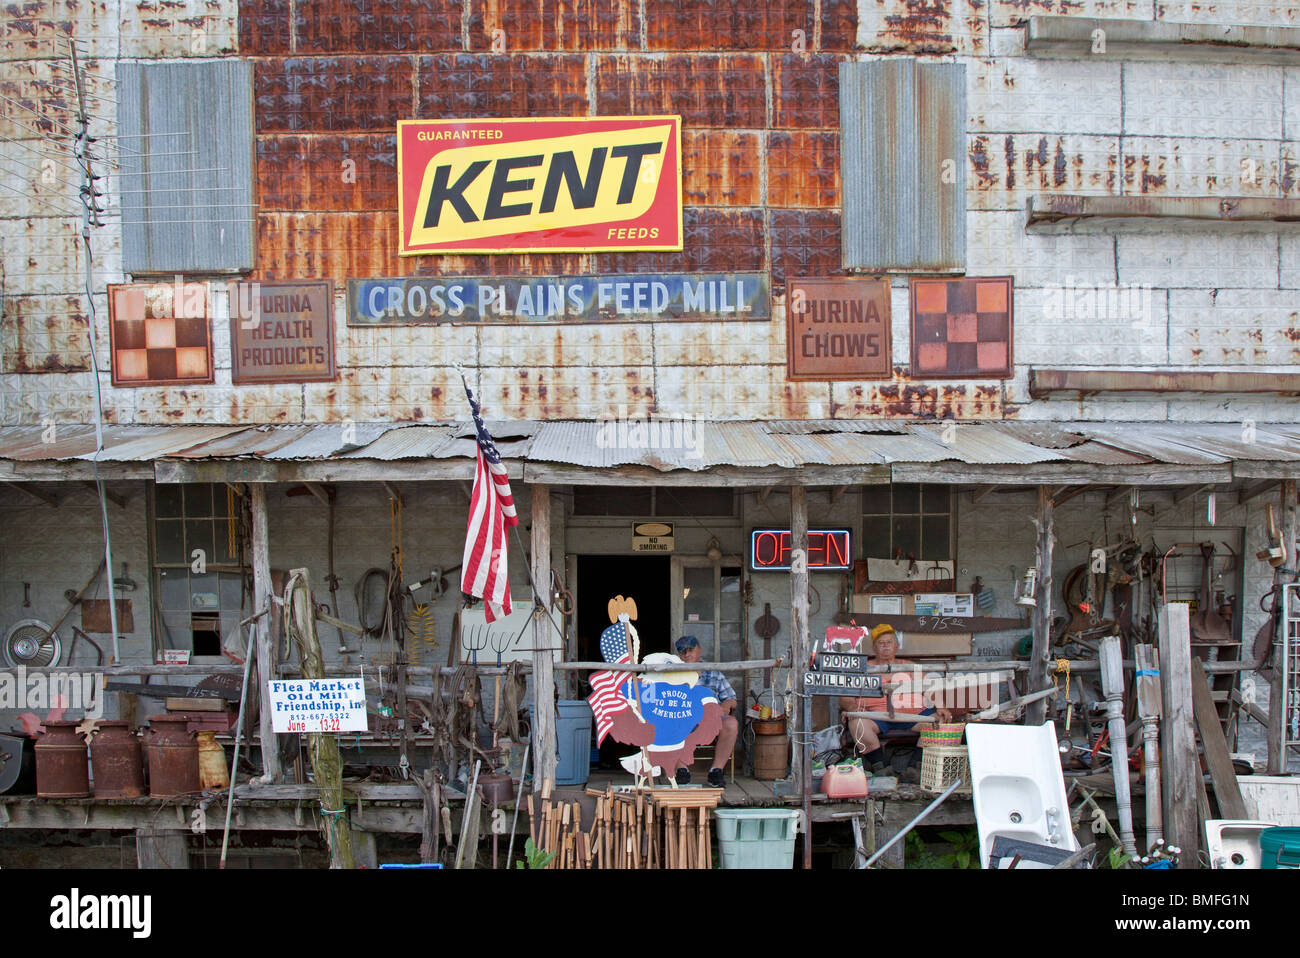 Cross Plains, Indiana - The old Cross Plains Feed Mill, now converted to a junk shop. Stock Photo